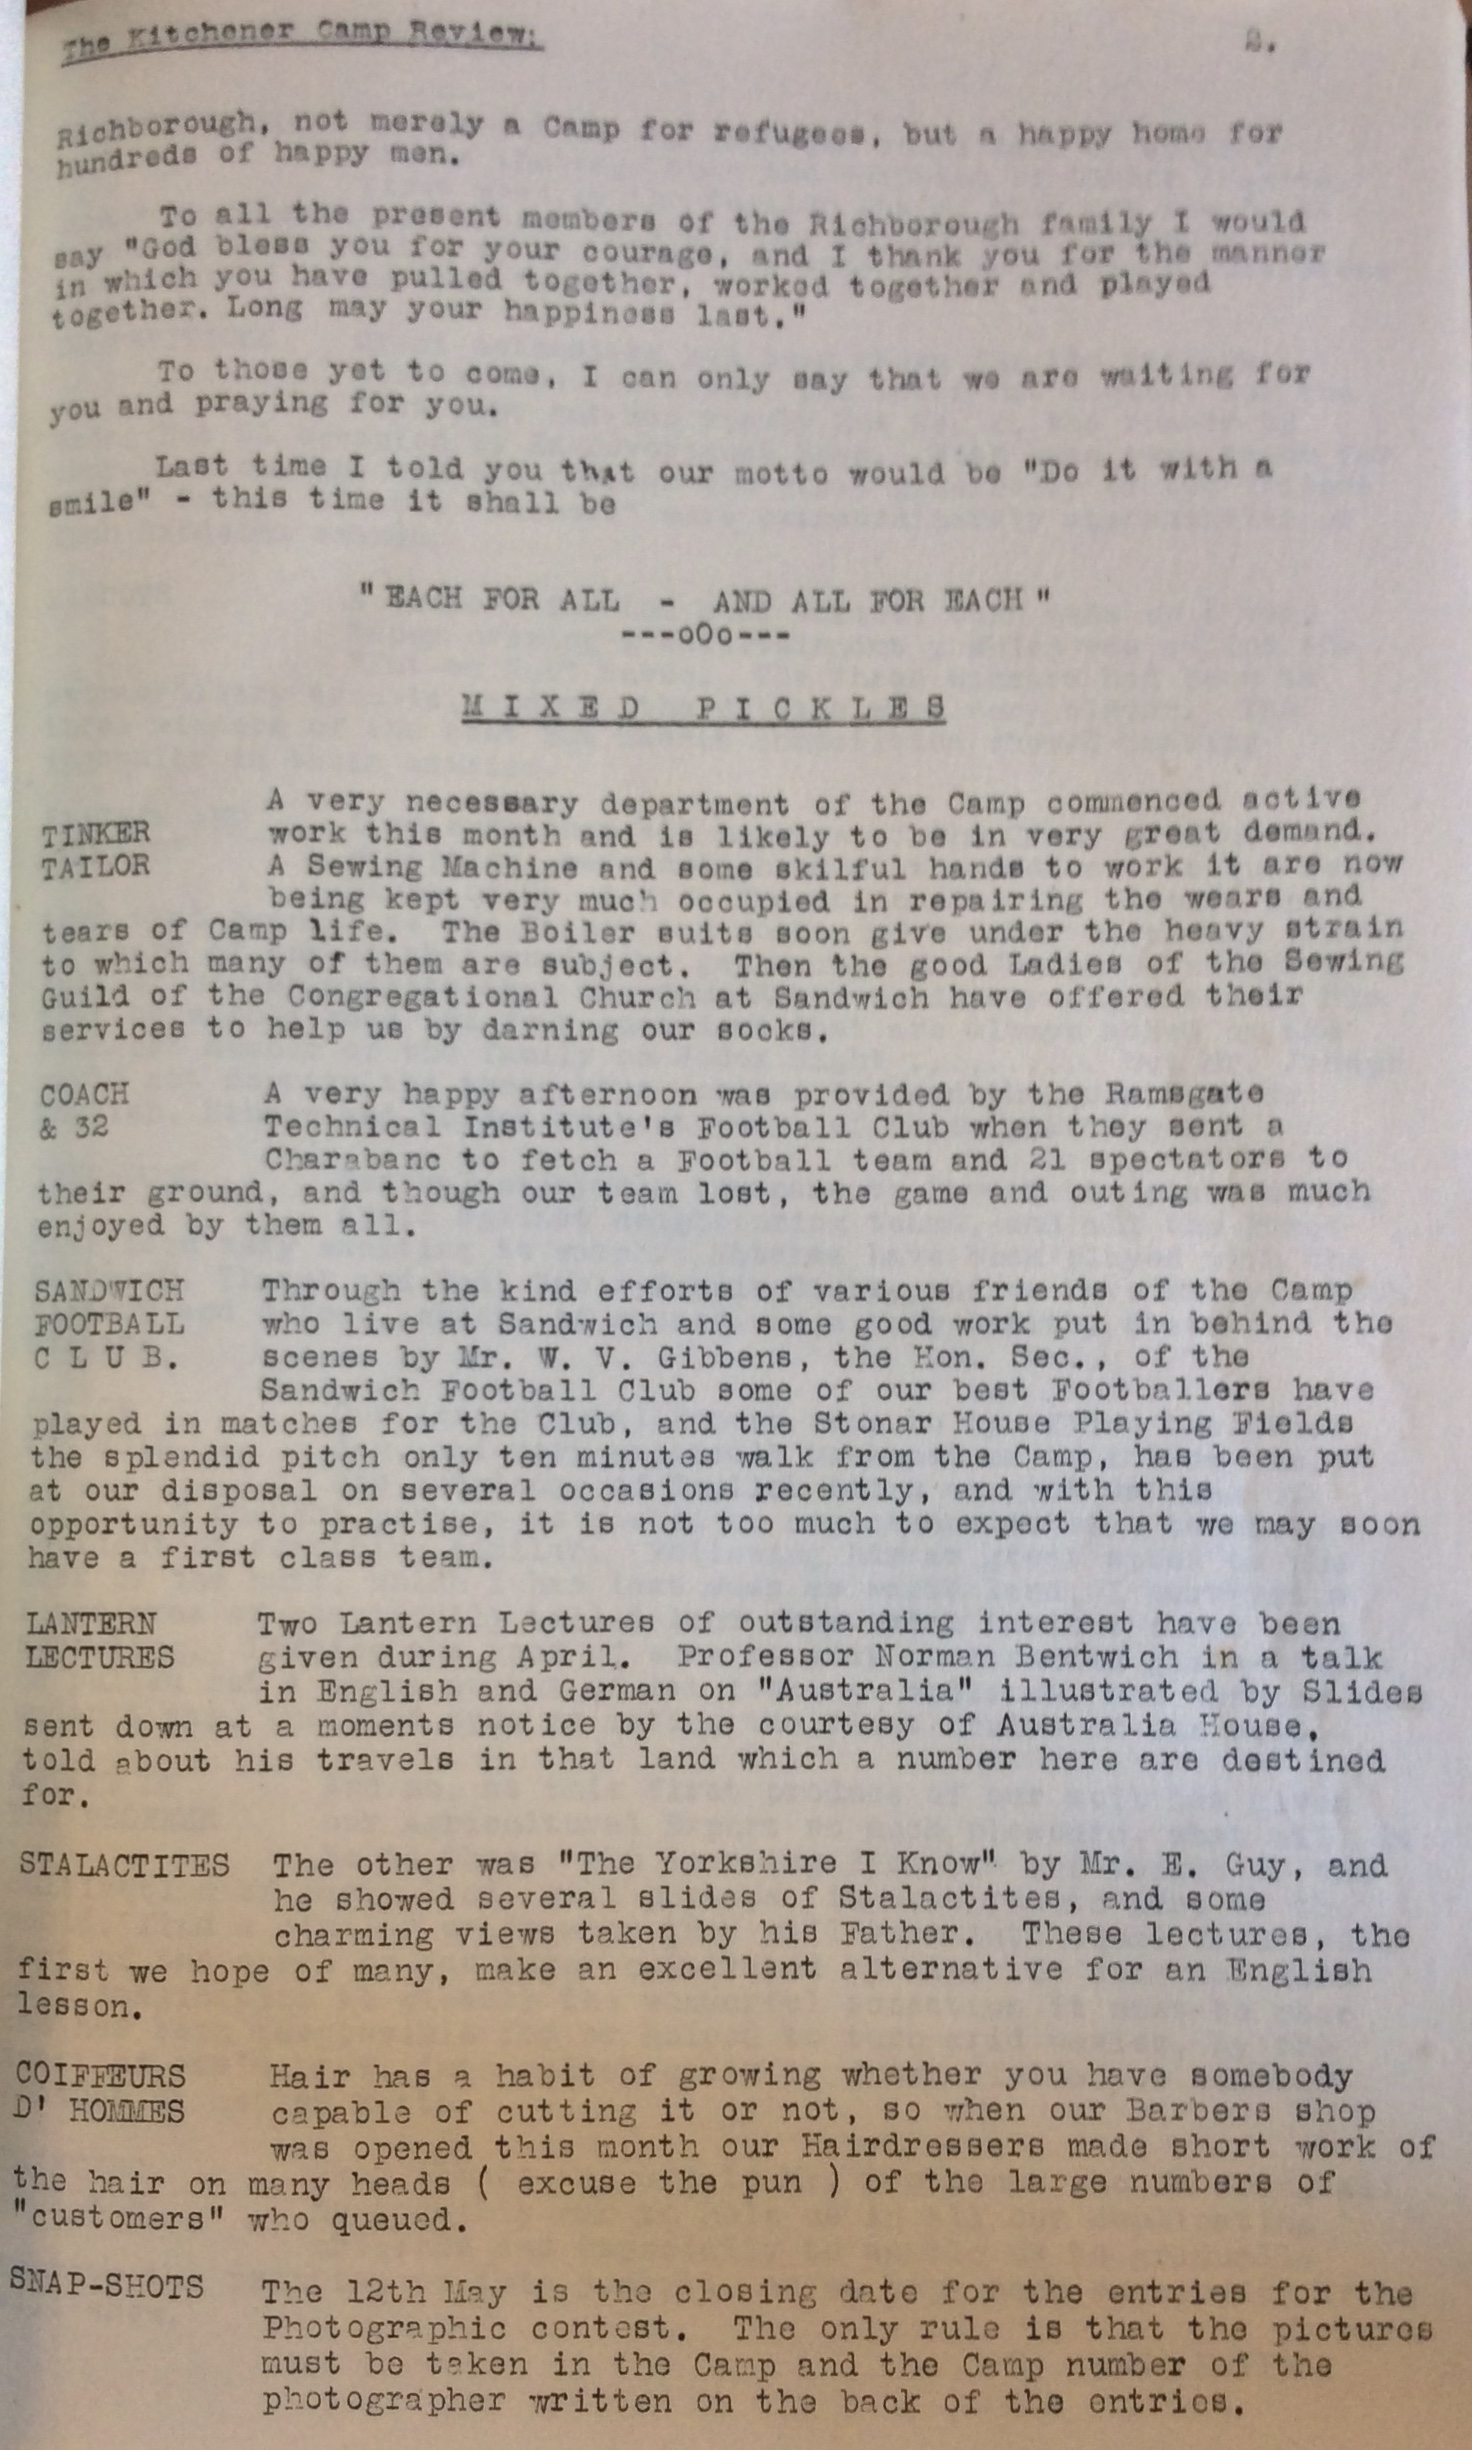 Kitchener Camp Review, May 1939, page 2